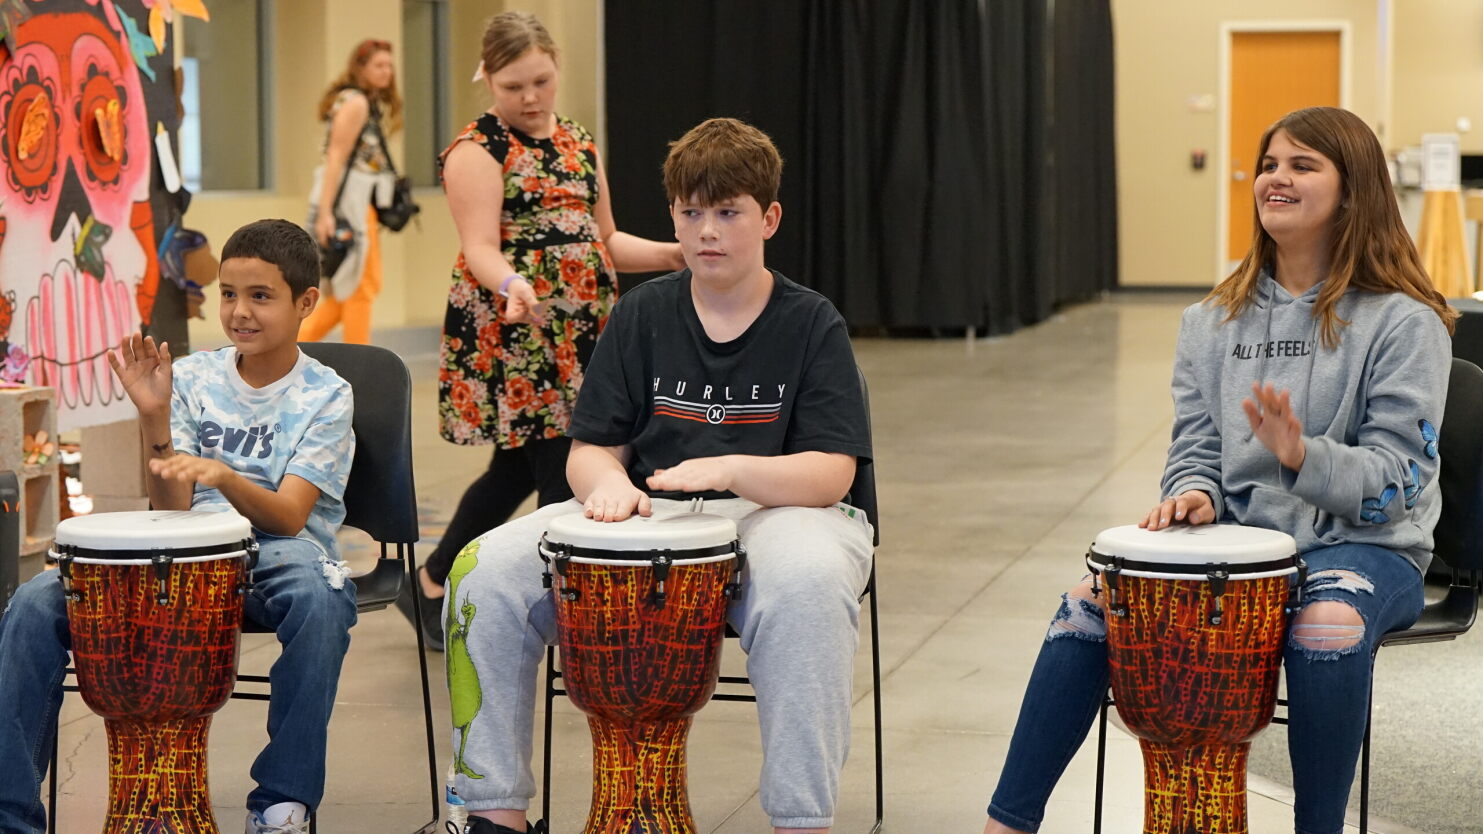 Students play the djembe drums.